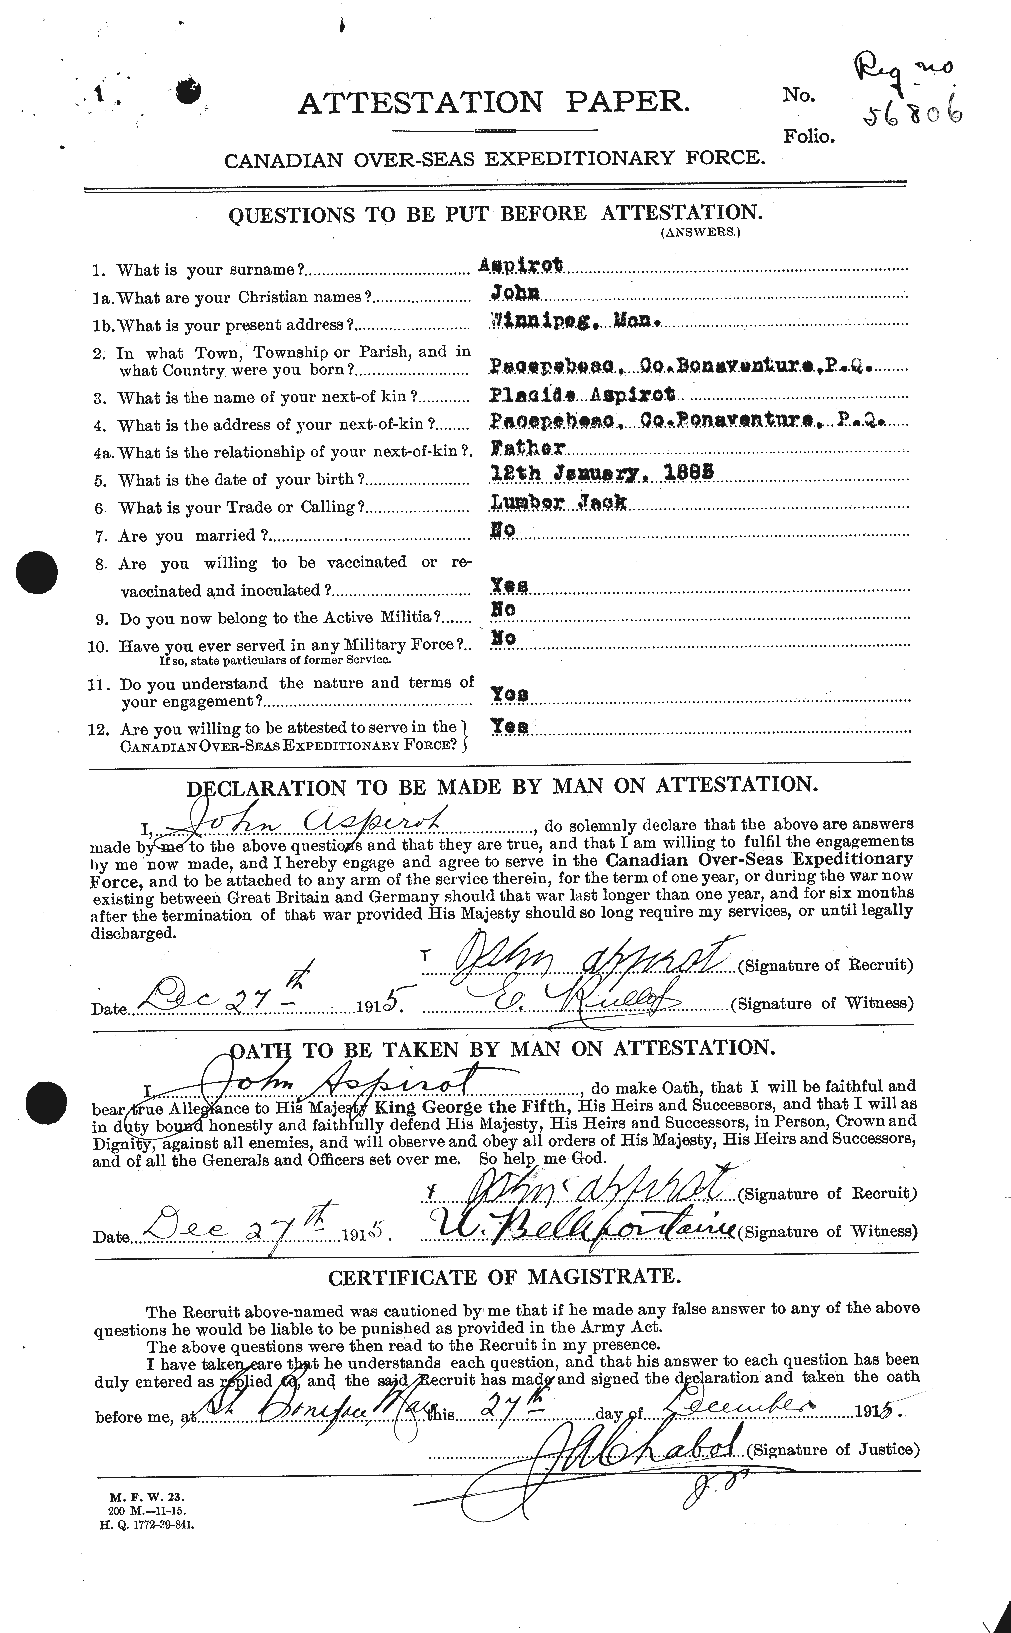 Personnel Records of the First World War - CEF 223551a